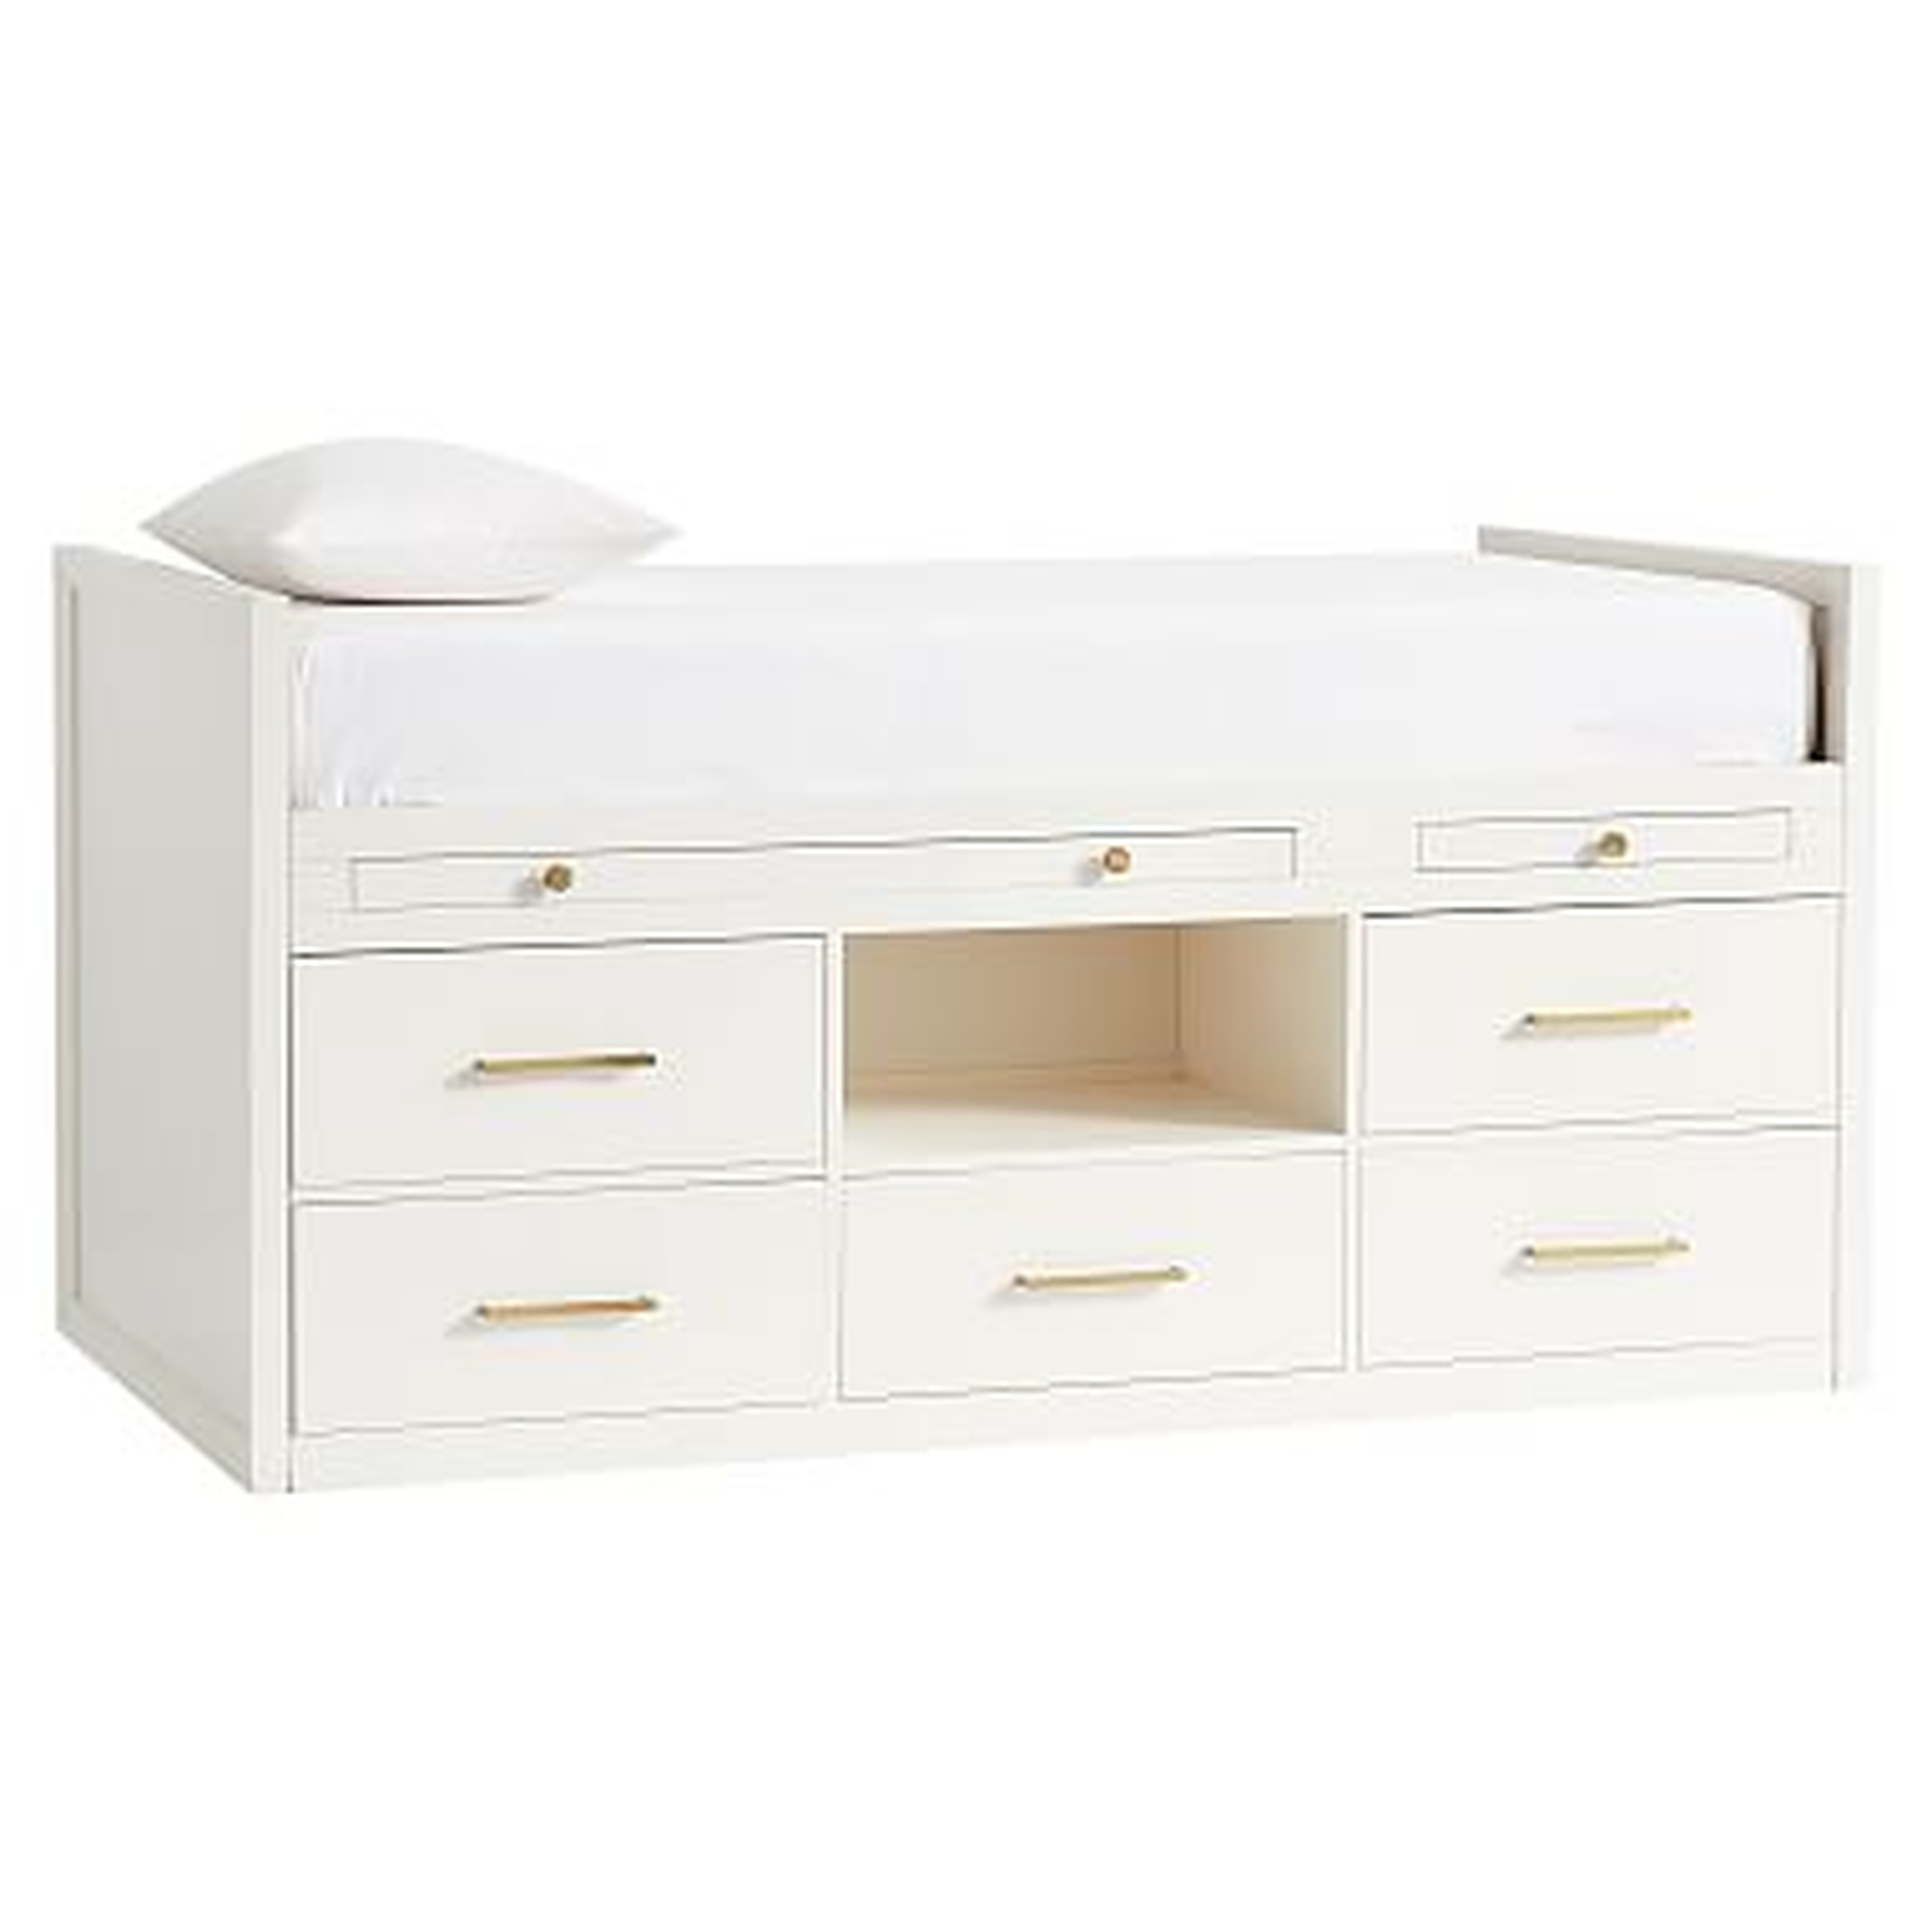 Cleary Captain's Bed, Full, Water-Based Simply White - Pottery Barn Teen